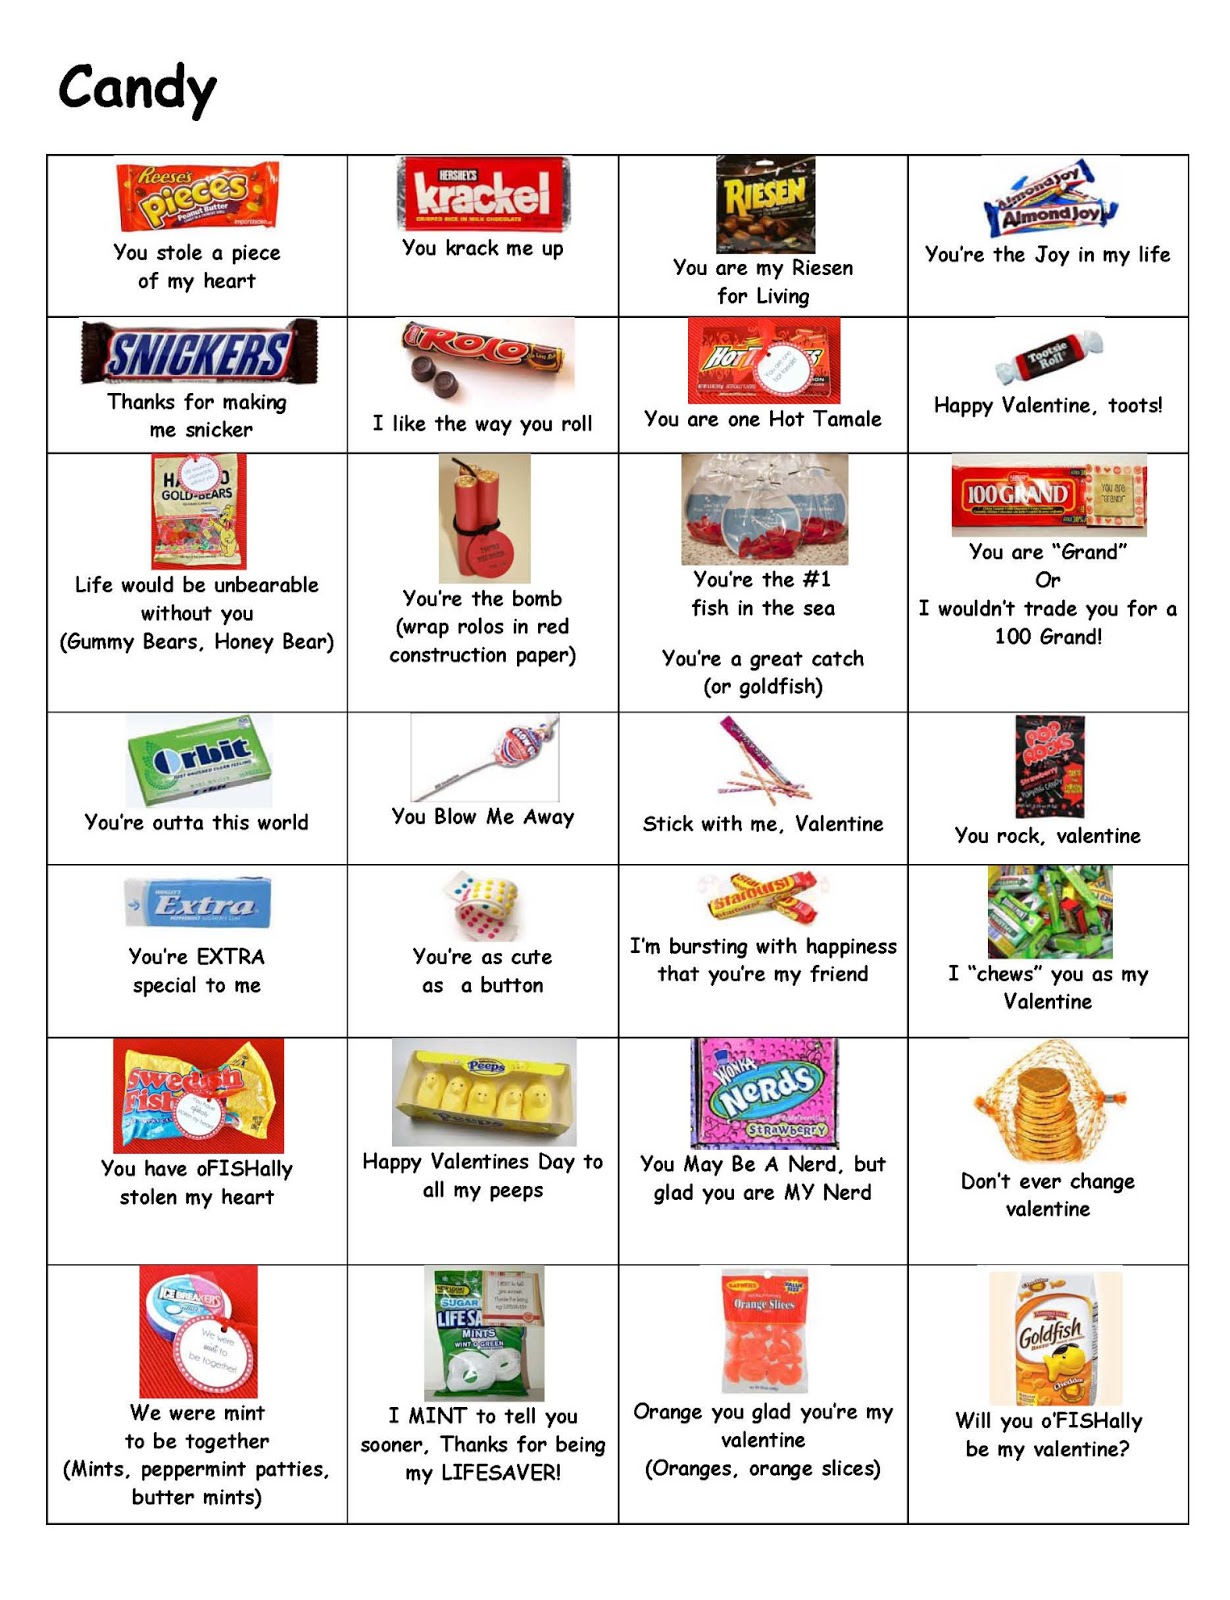 School Stuff on Pinterest | Candy Bar Sayings, Candy Sayings and Candy Bars